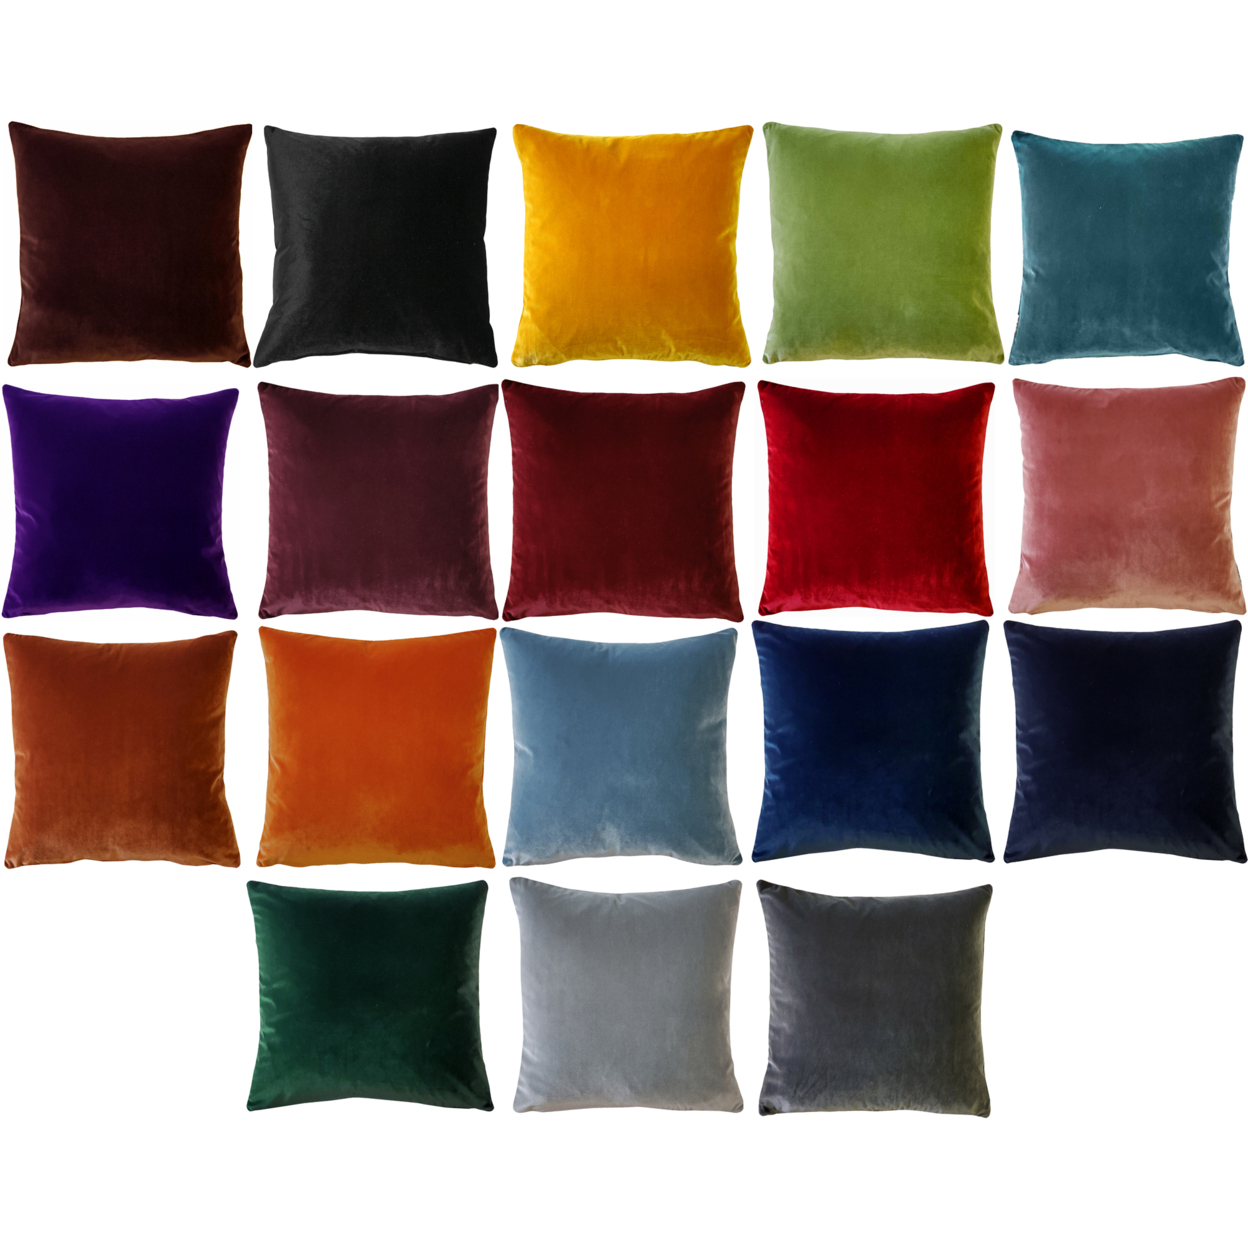 Castello Velvet Throw Pillows, Complete Pillow With Polyfill Pillow Insert (18 Colors, 3 Sizes) - Teal Blue, 12x20